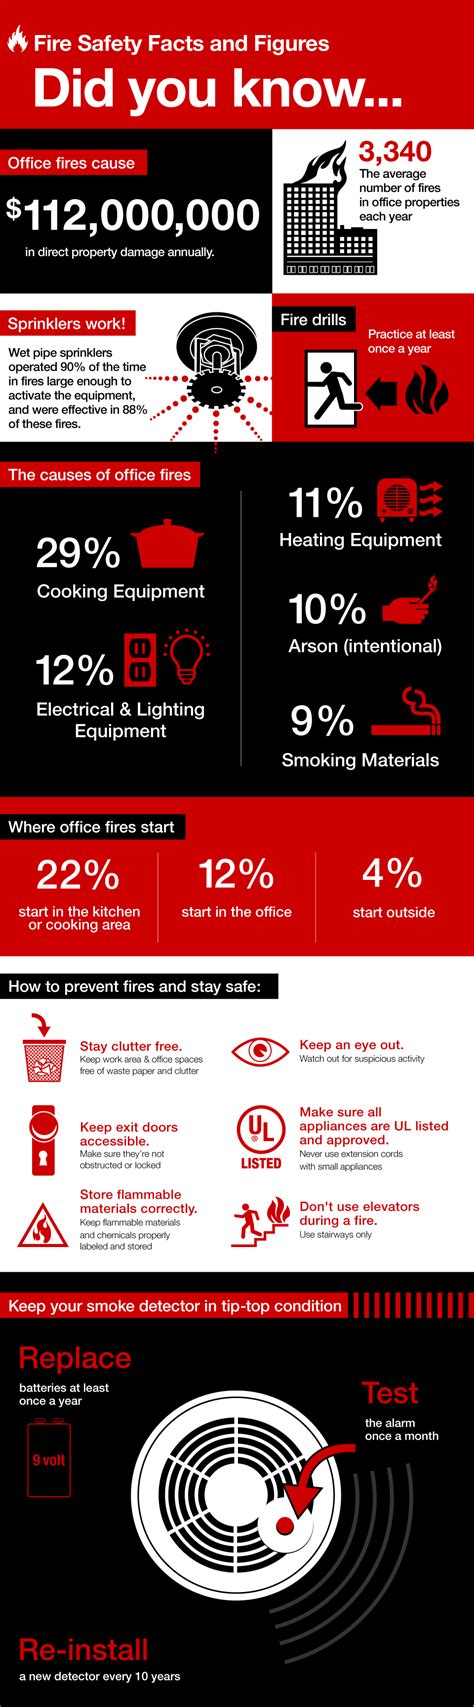 Fire Safety Facts And Figures Office Fires Infographic